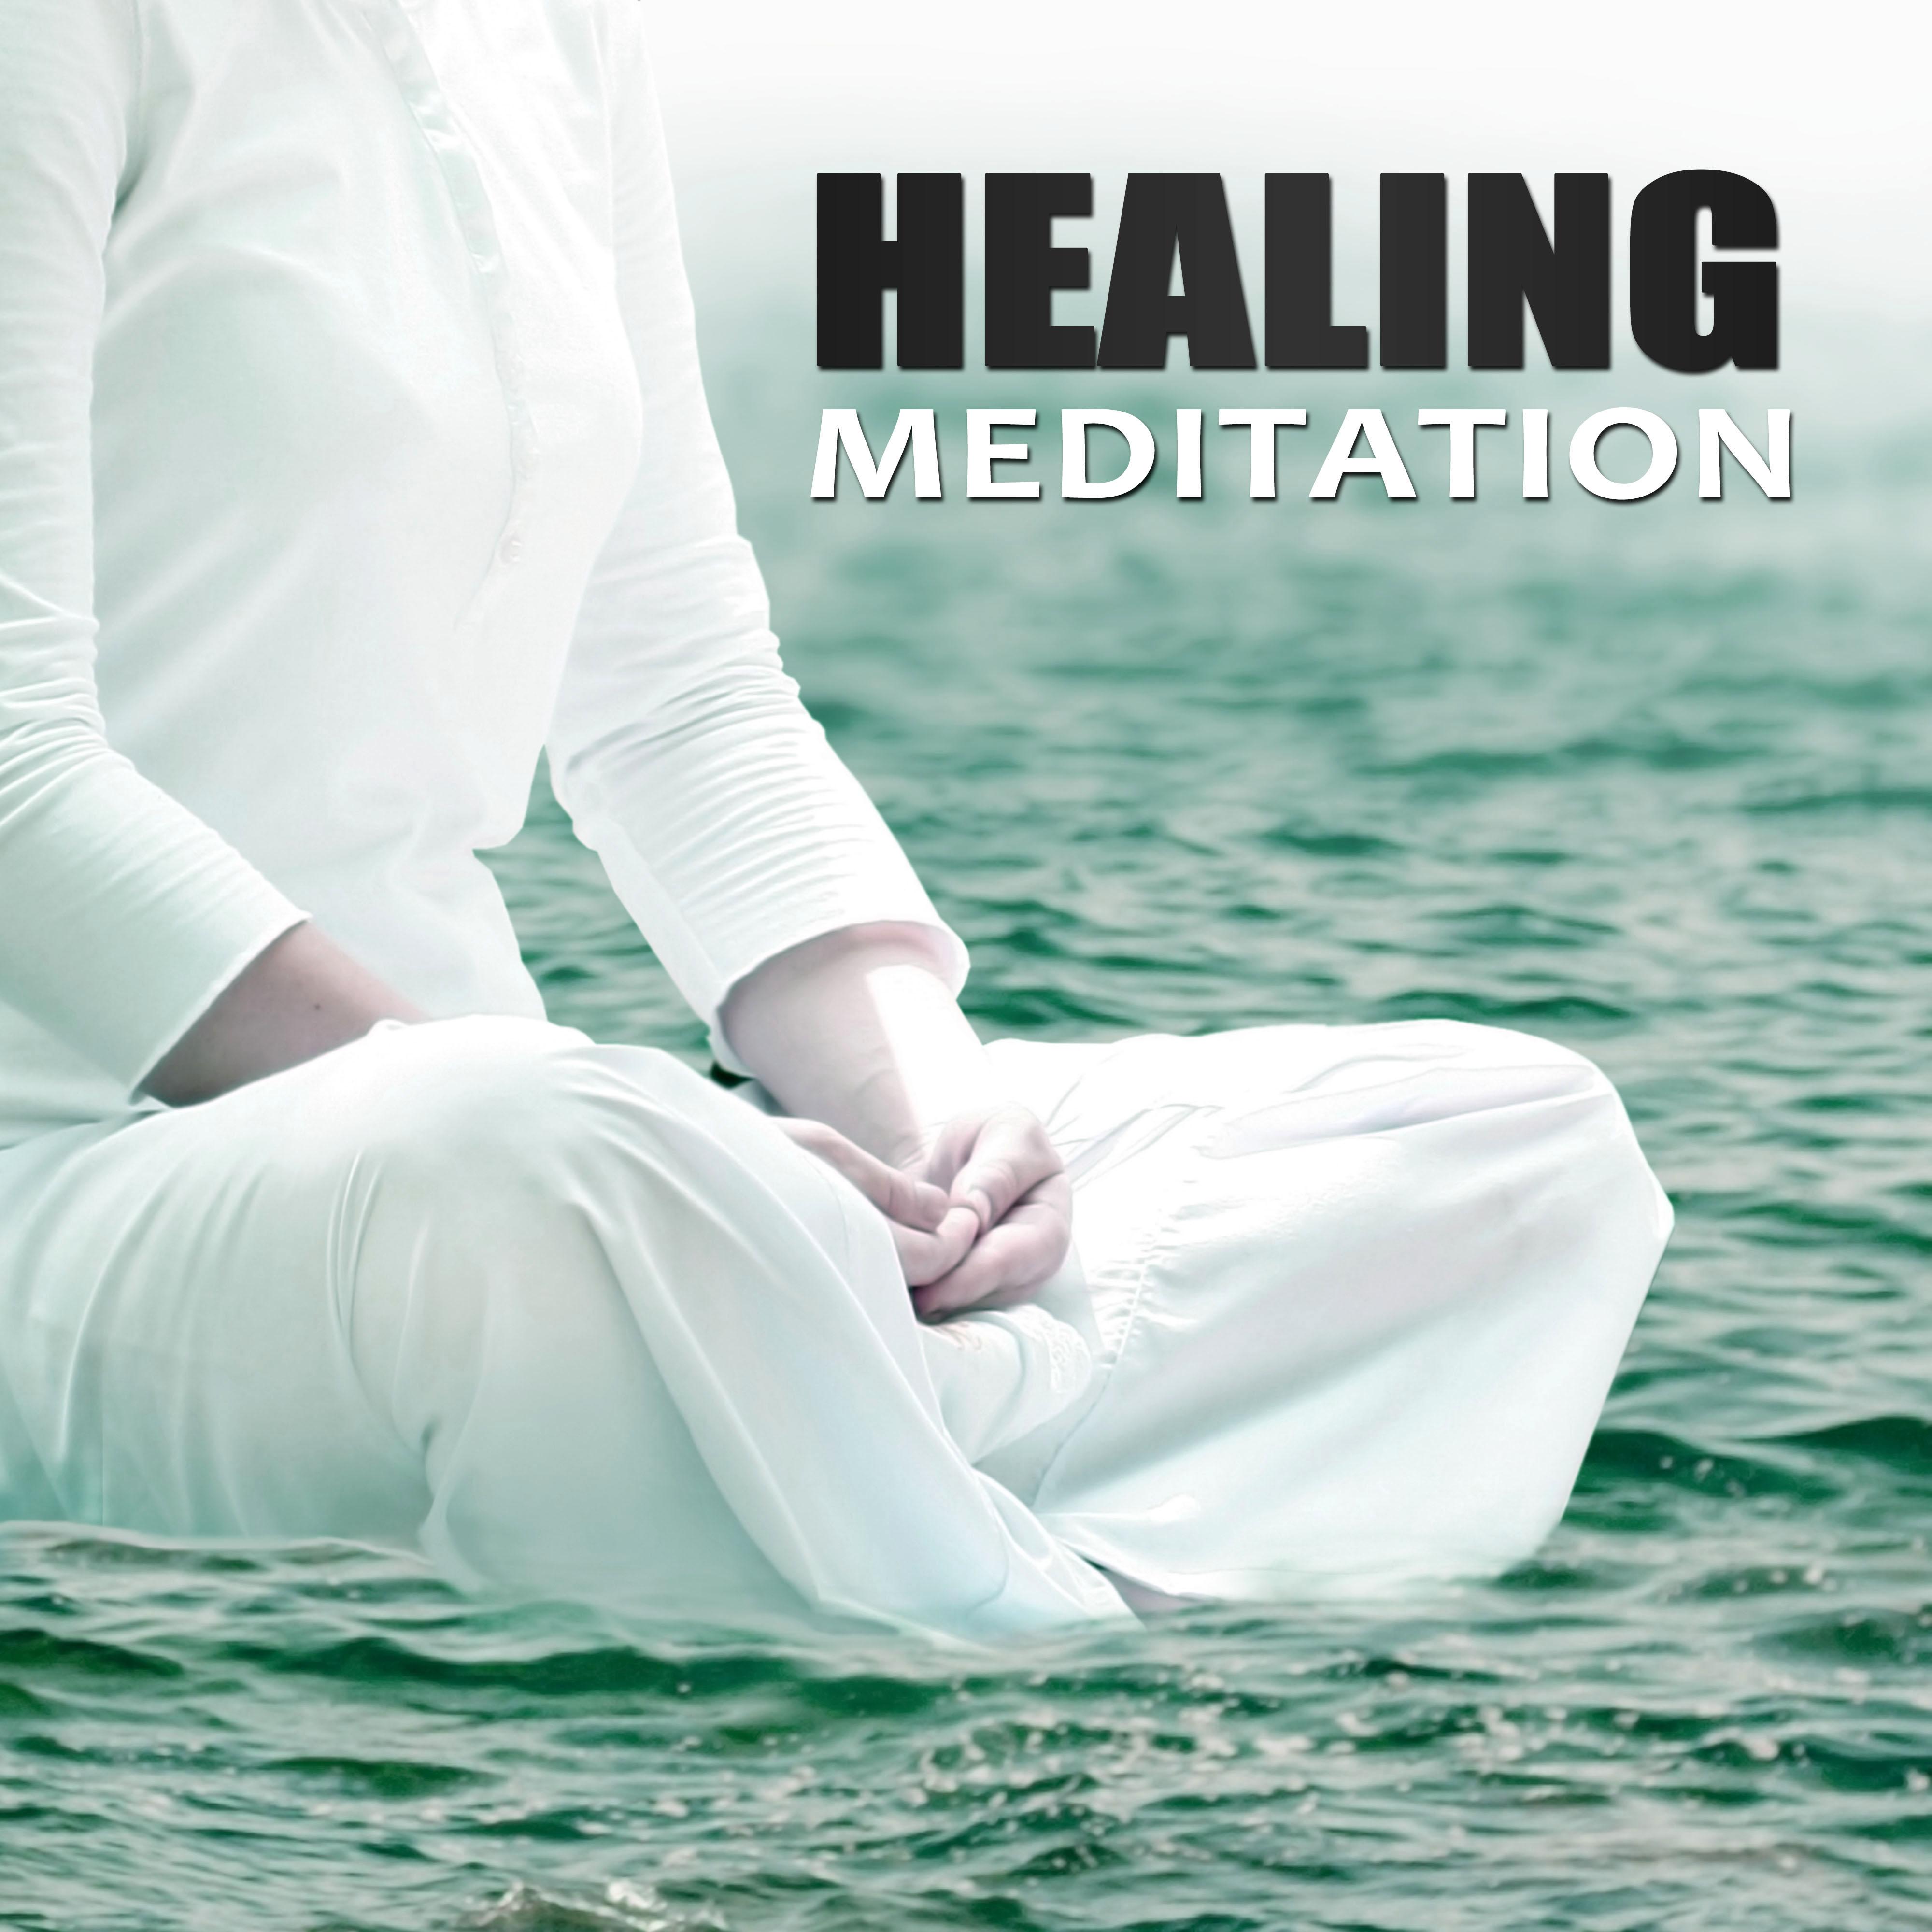 Healing Meditation  Relaxation Sounds, Music Therapy, Relax, Relief, Music for Yoga, Spirituality, Calm Meditation, New Age